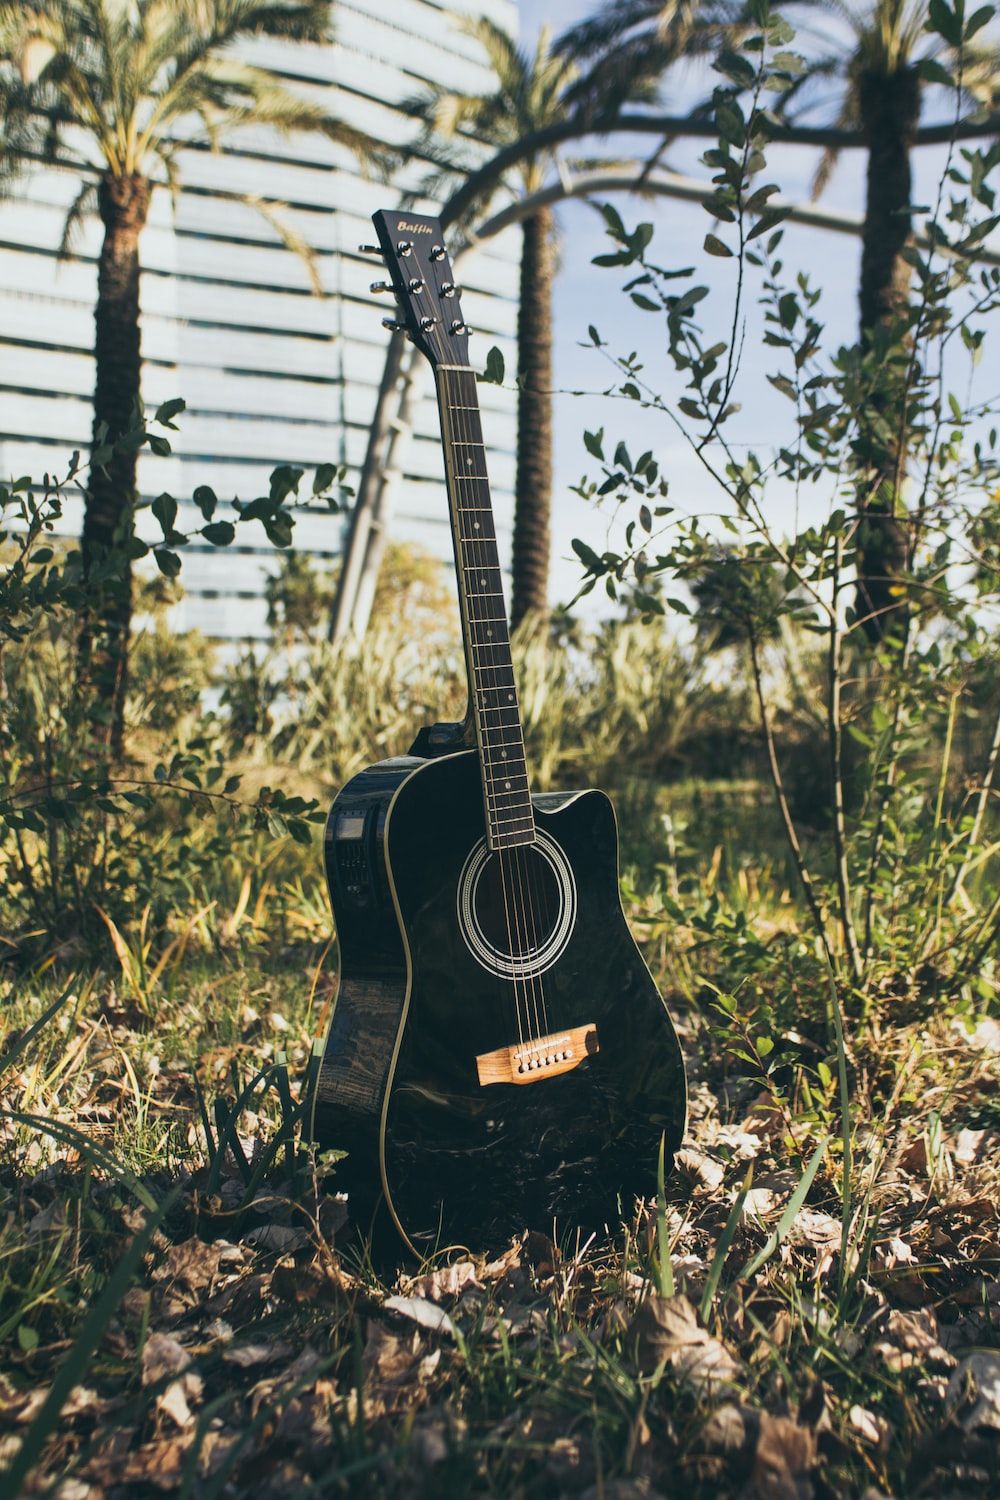 A black acoustic guitar in the grass. - Guitar